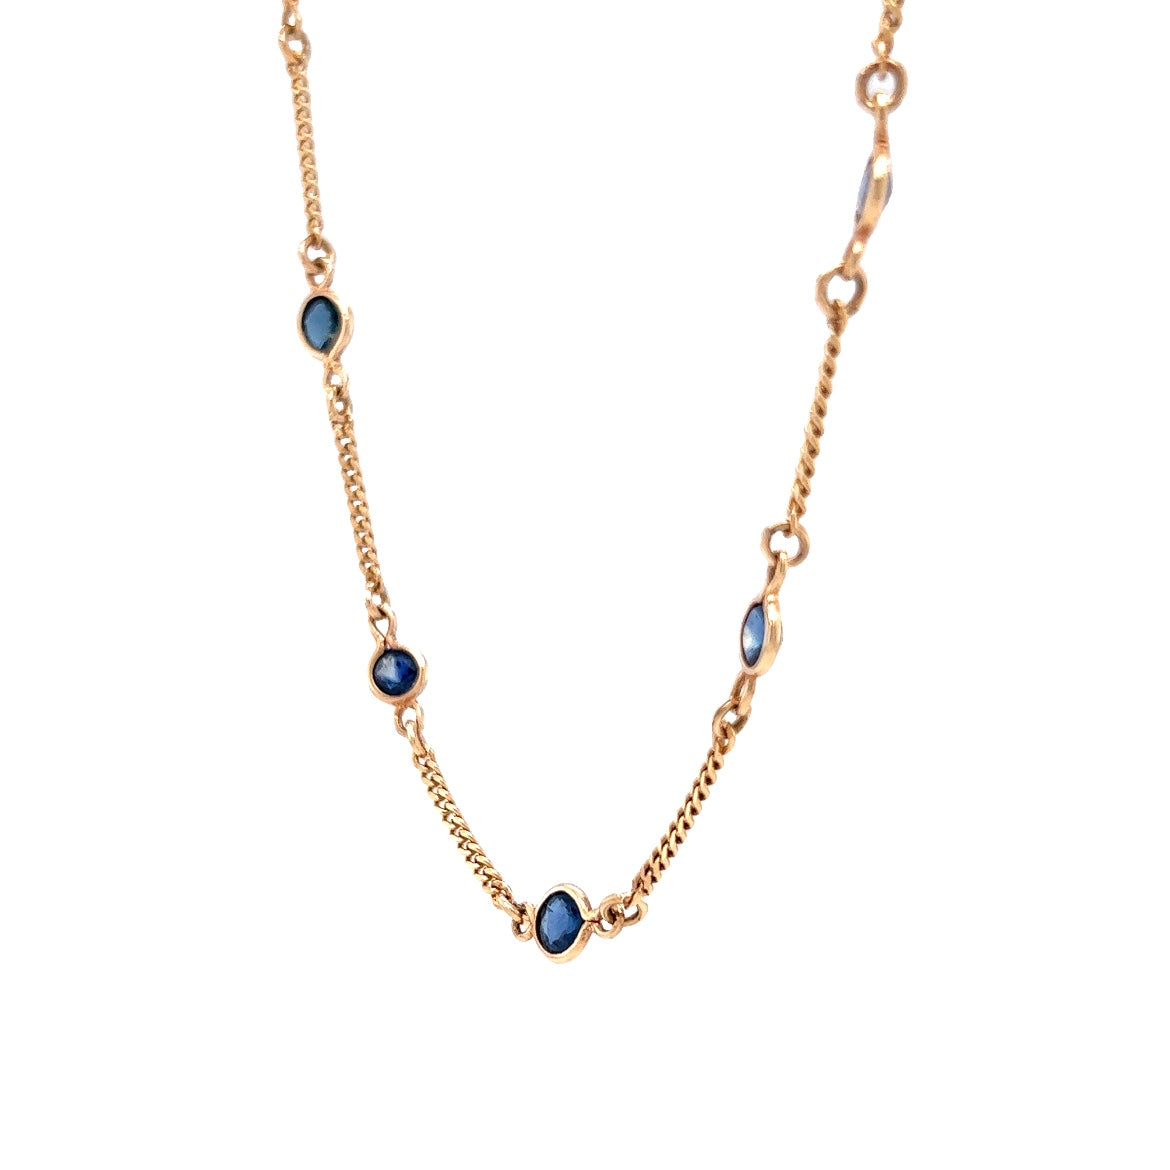 7.75 Bezel Set Sapphire Necklace in 18k Yellow Gold